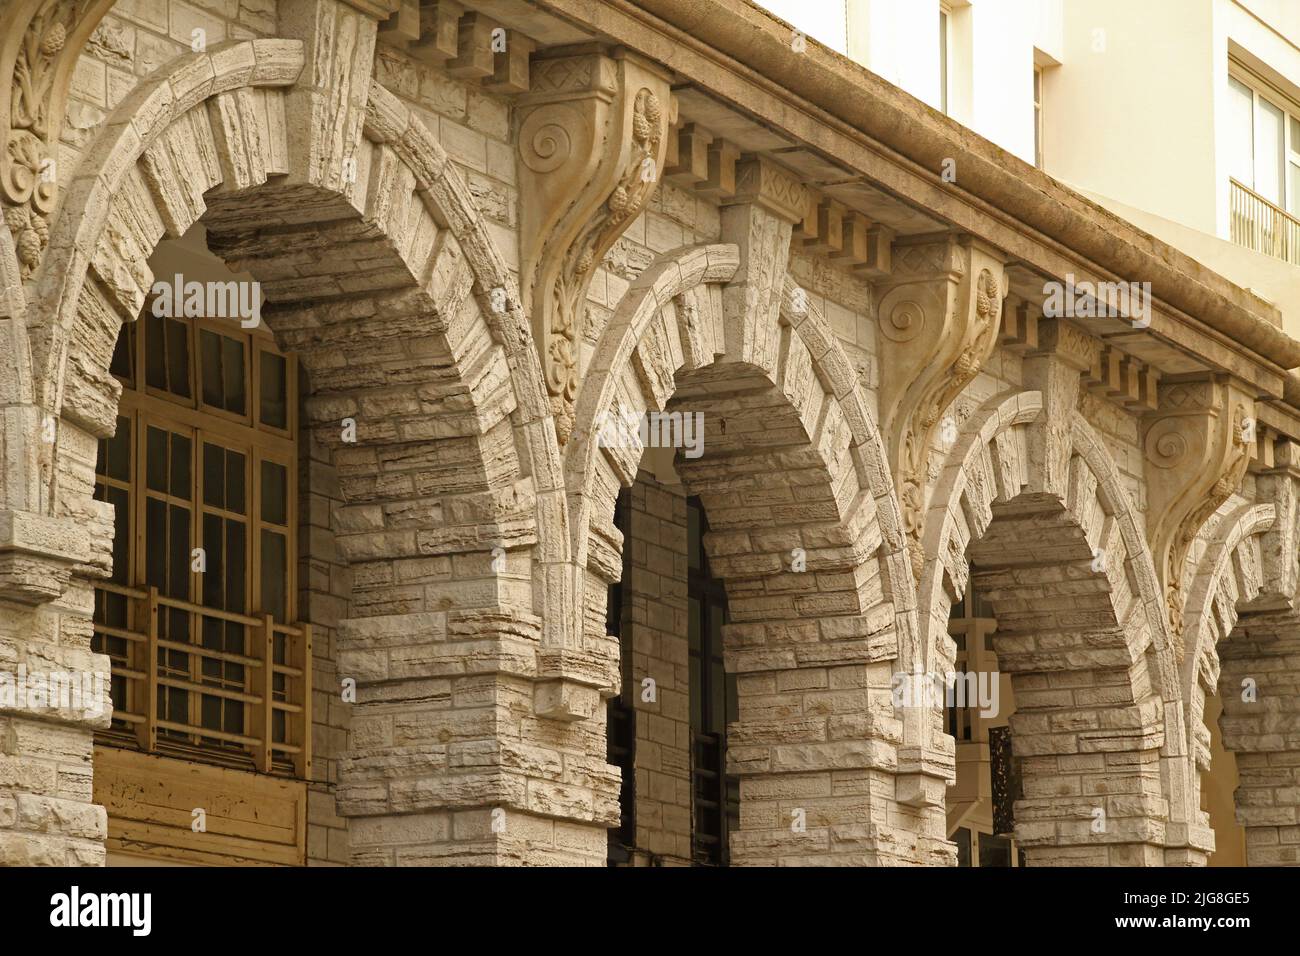 A beautiful shot of stone arches on the aged building Stock Photo